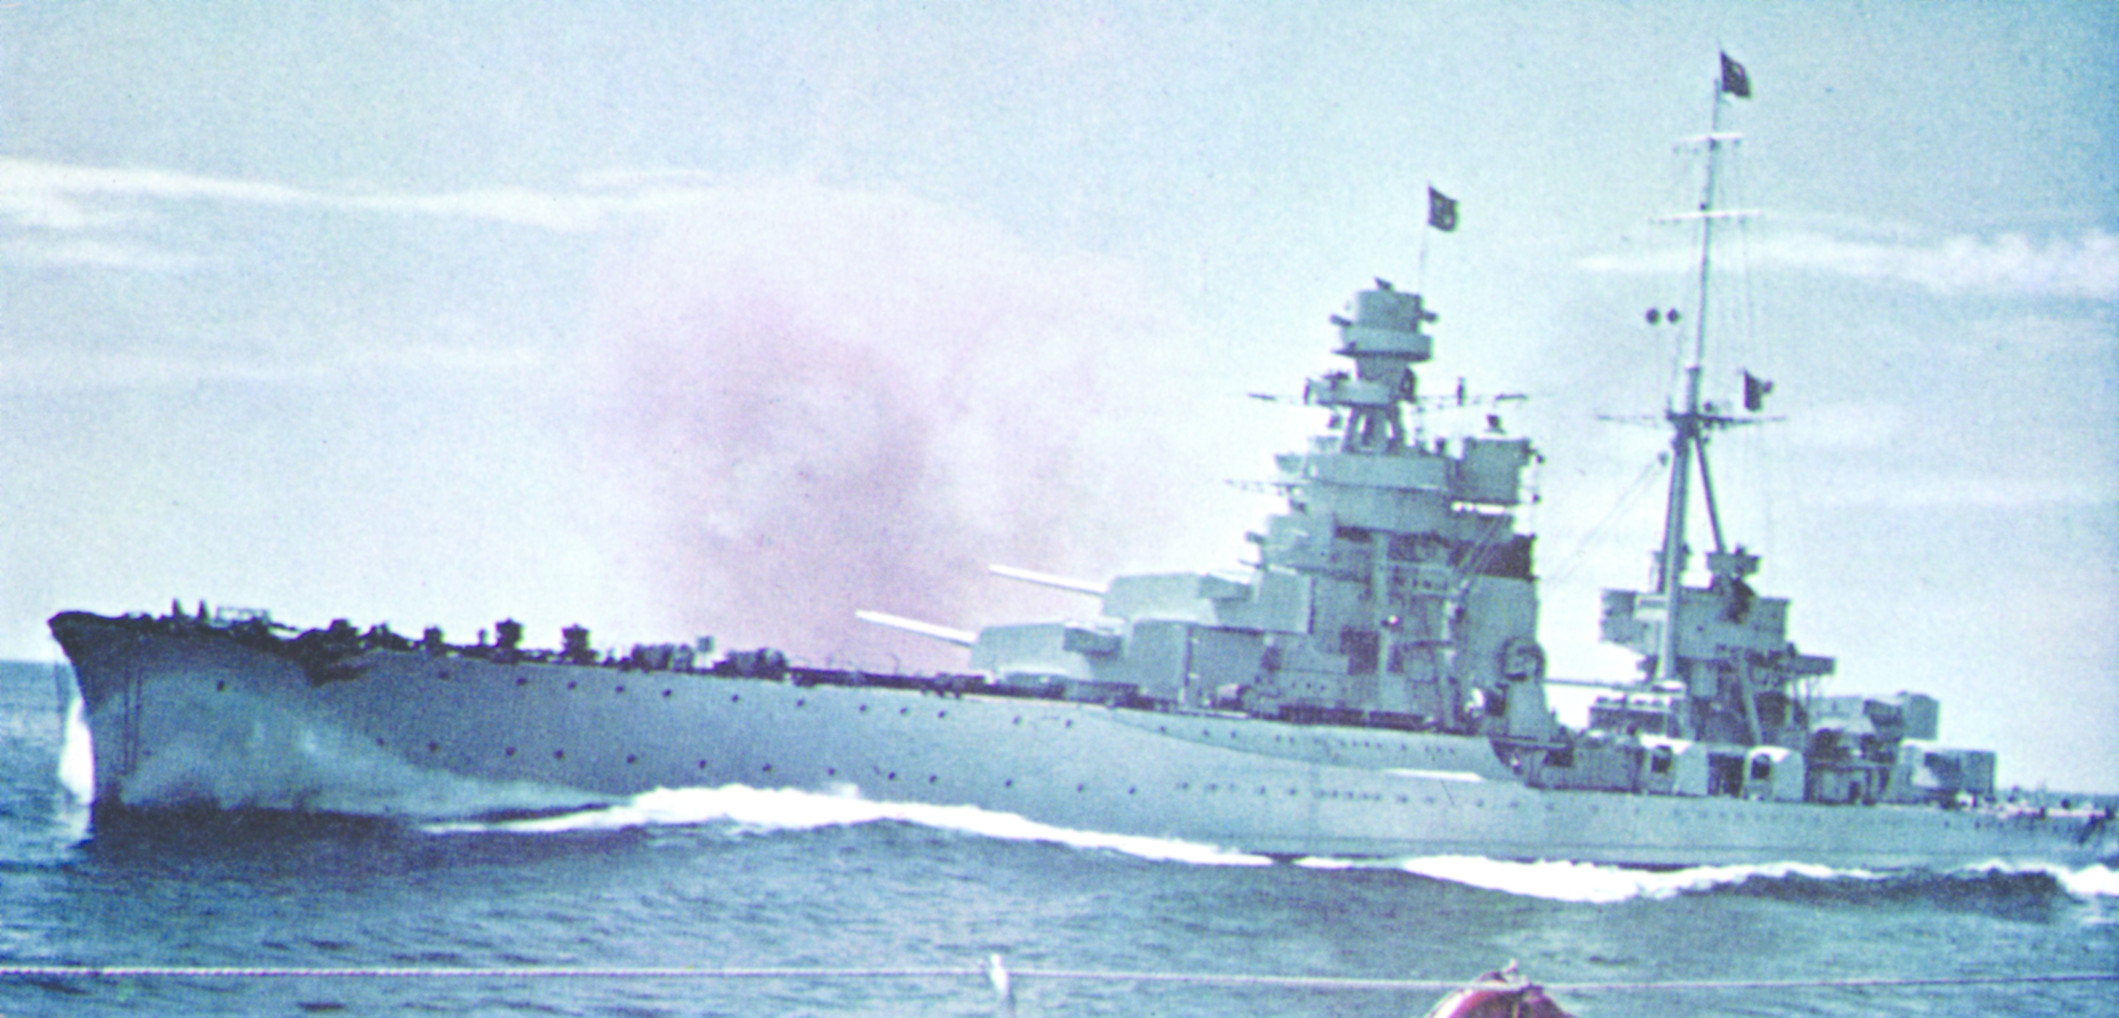 An Italian heavy cruiser of the Zara-class cuts through the waters of the Mediterranean.  Three of these warships, the Zara, Pola, and Fiume, armed with 8-inch main weapons, were lost during the Battle of Cape Matapan.